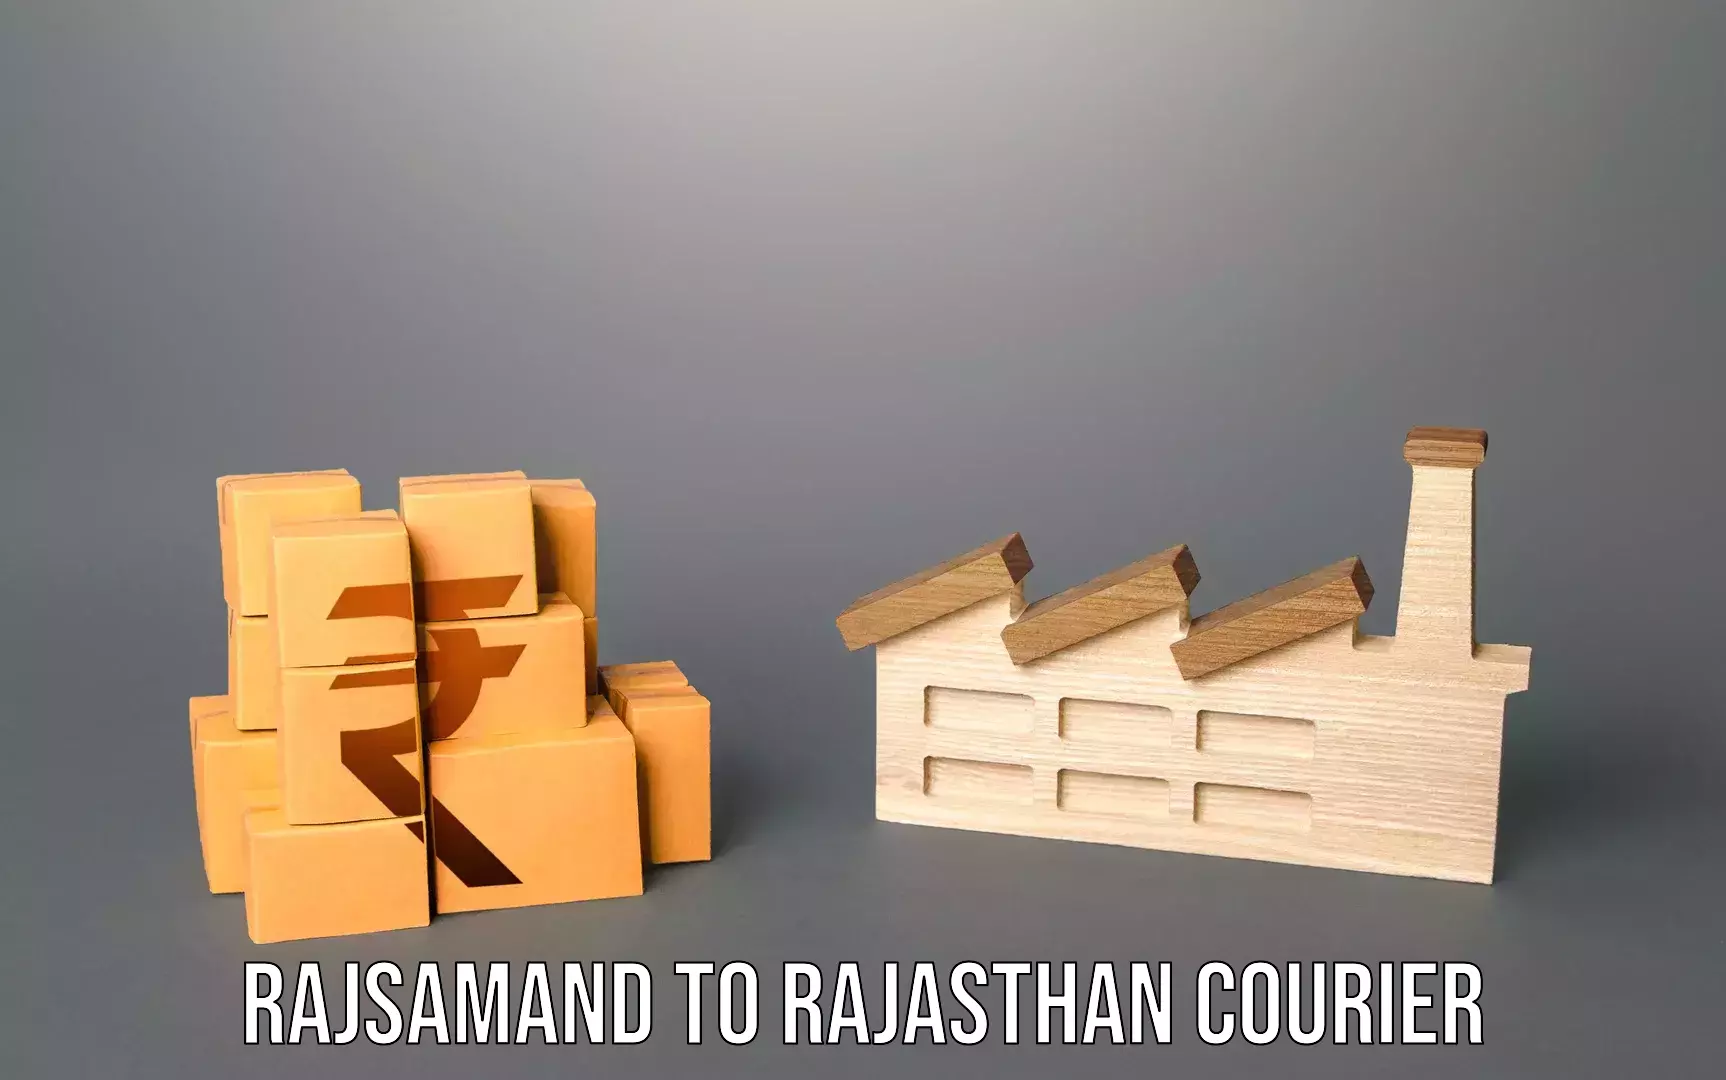 Luggage transport consulting Rajsamand to Udaipur